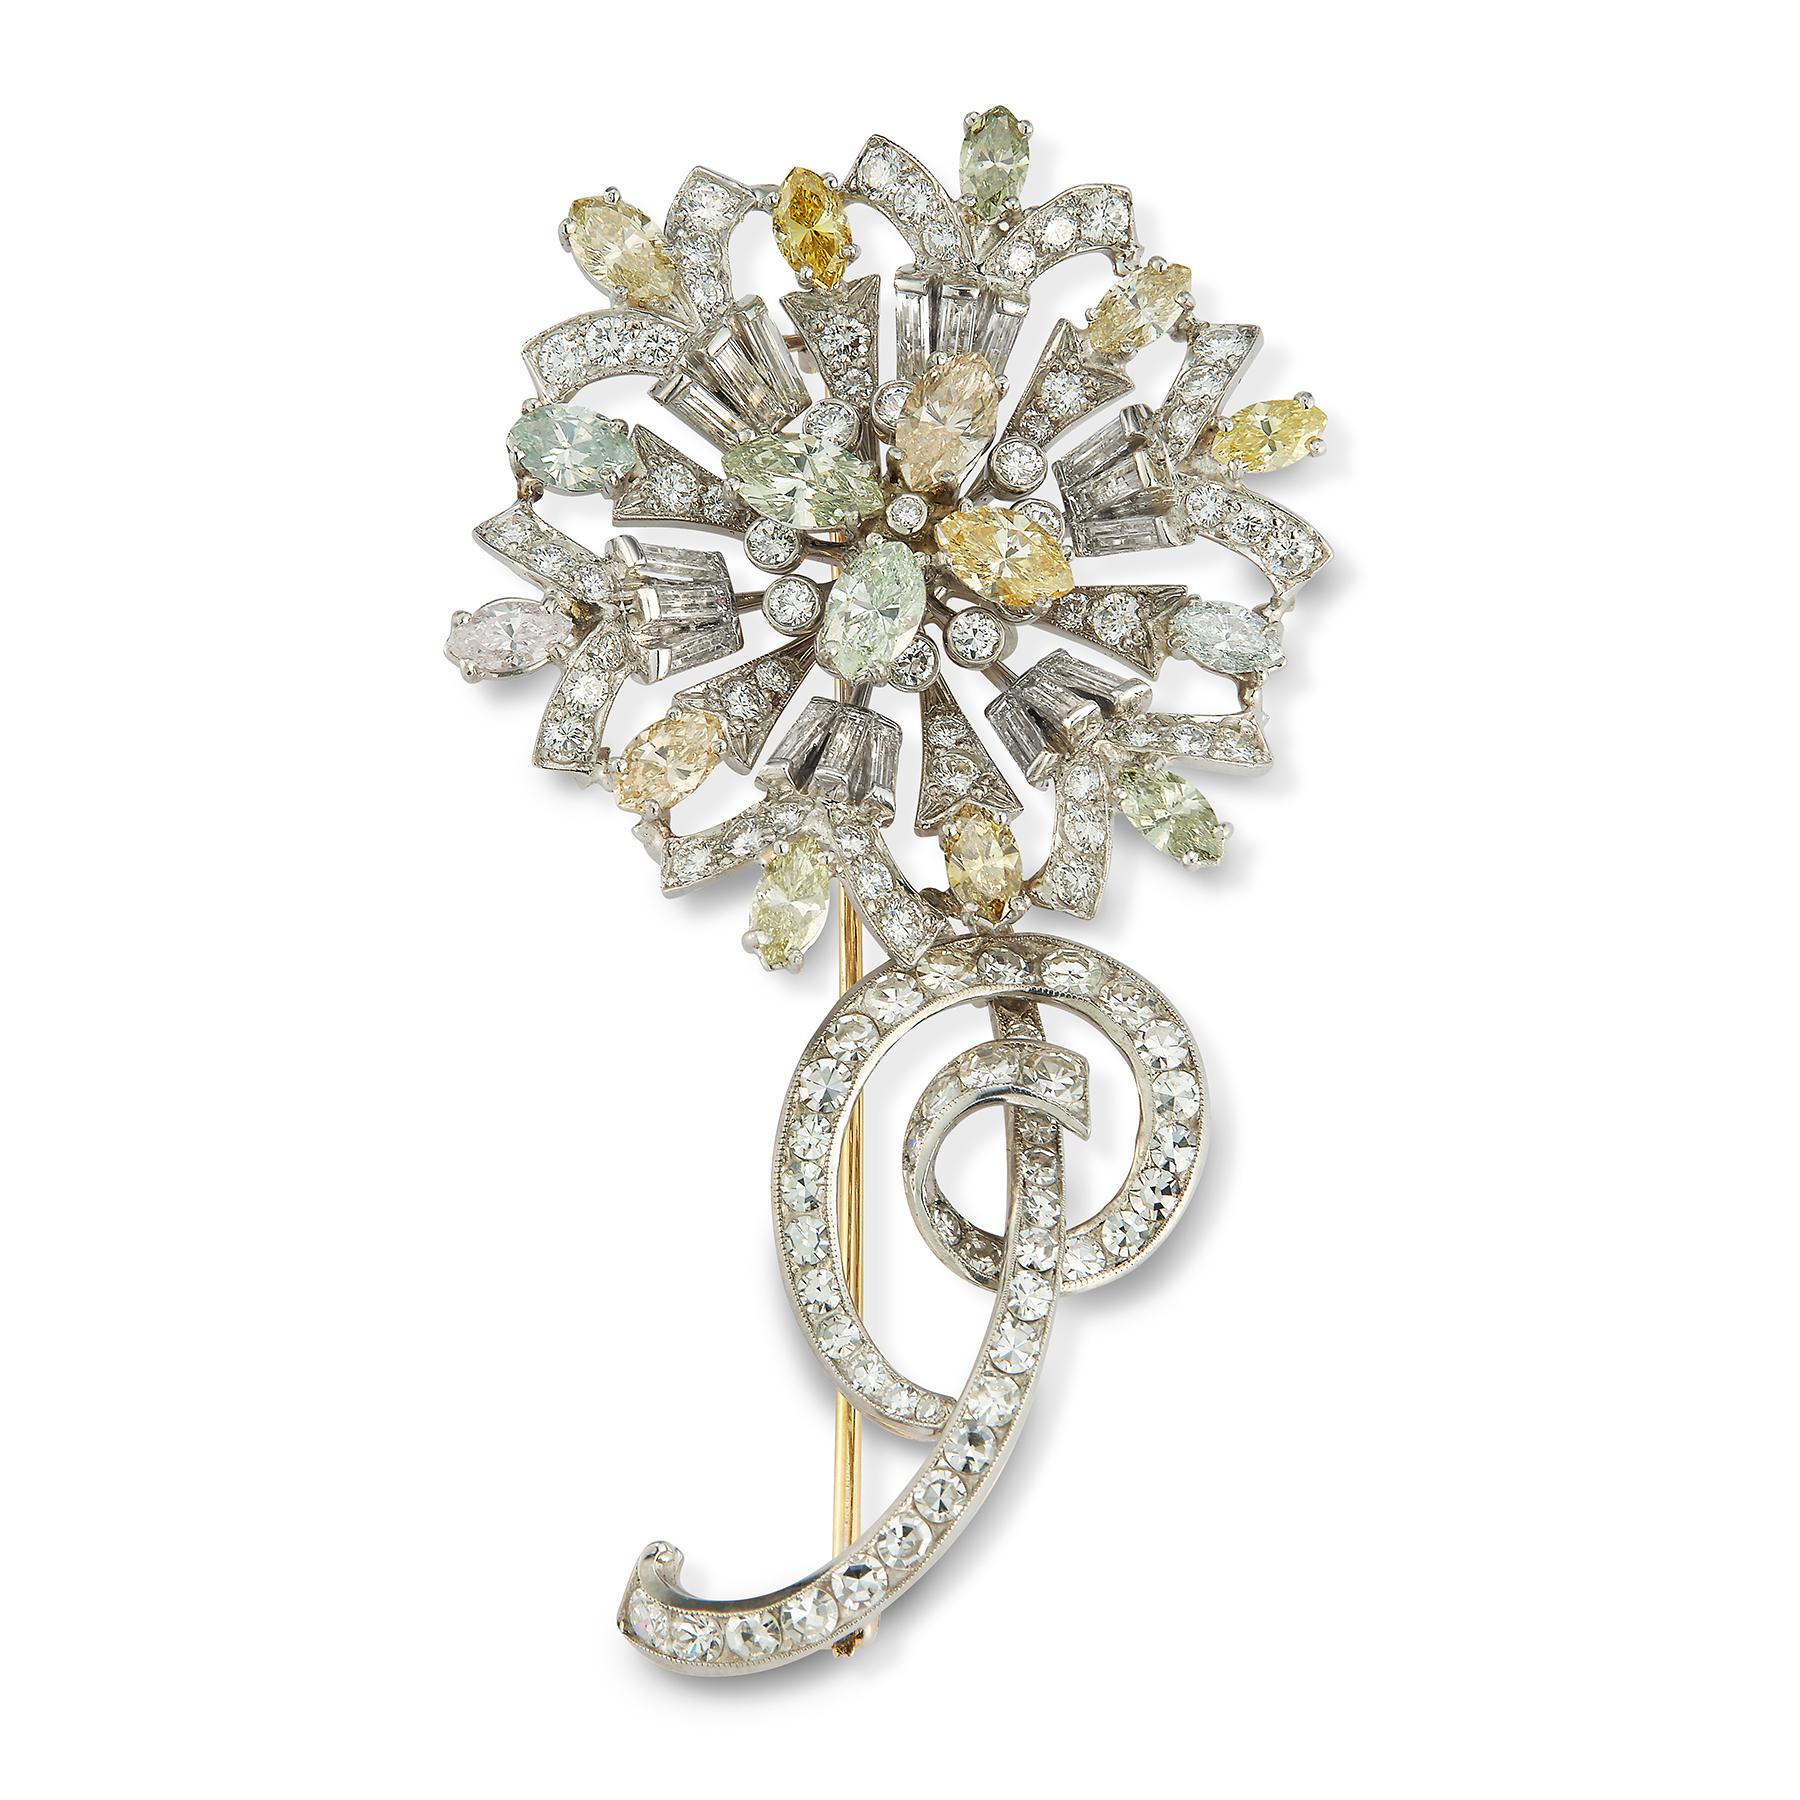 Tiffany & Co Certified Multi color Diamond Flower Brooch, Circa 1940, set with fancy colored diamonds in shades of pink, green, blue, grey, yellow, brown & orange. Marquise brilliant-cut diamonds, total approximately 4.95 cts. Round brilliant-cut,